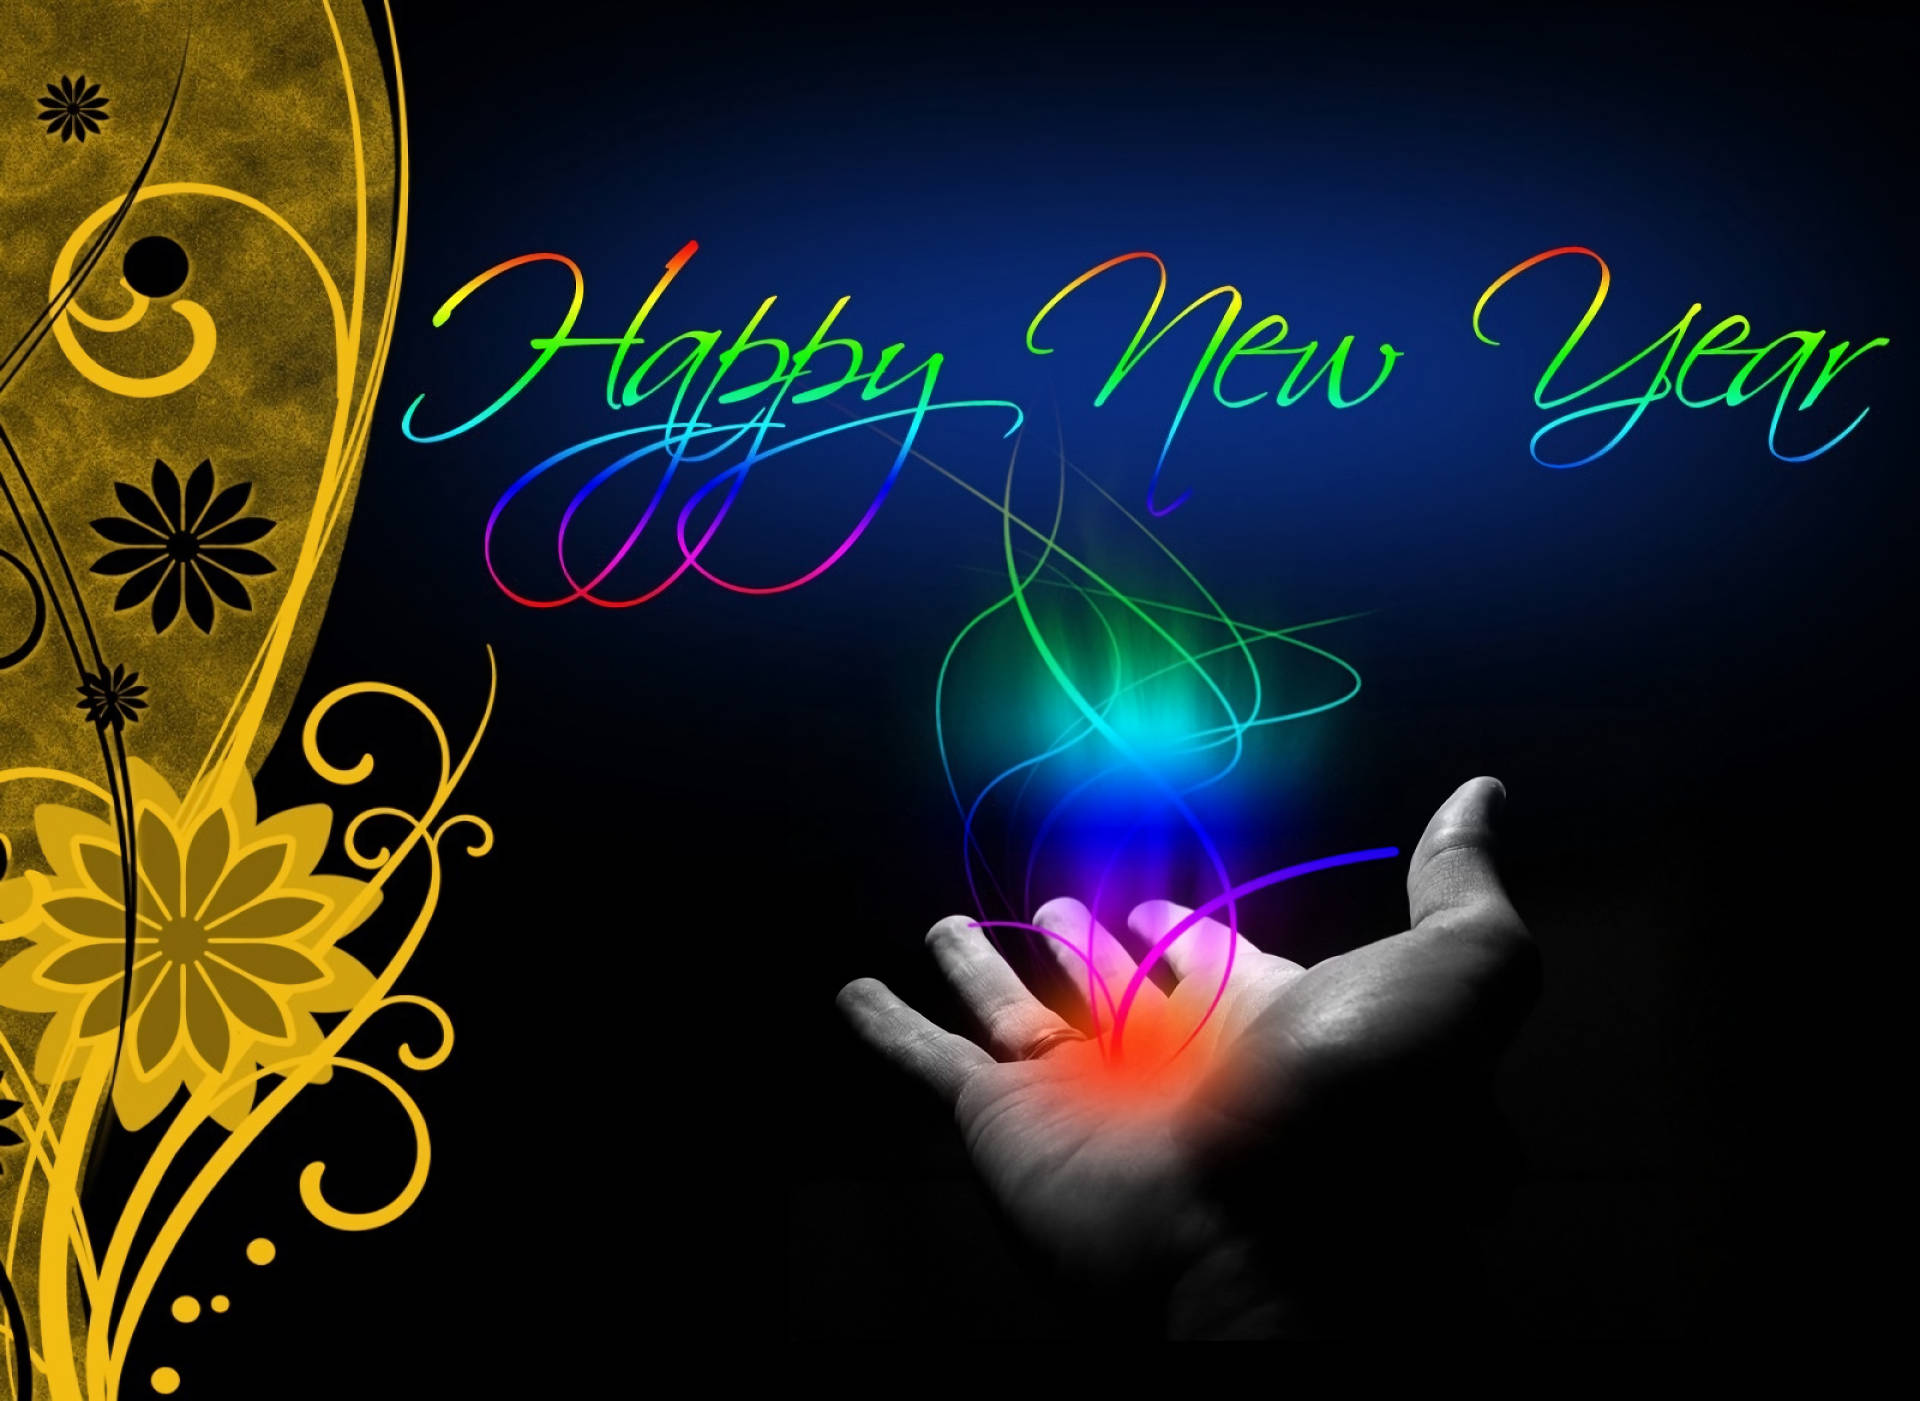 New Year Greetings And Hand